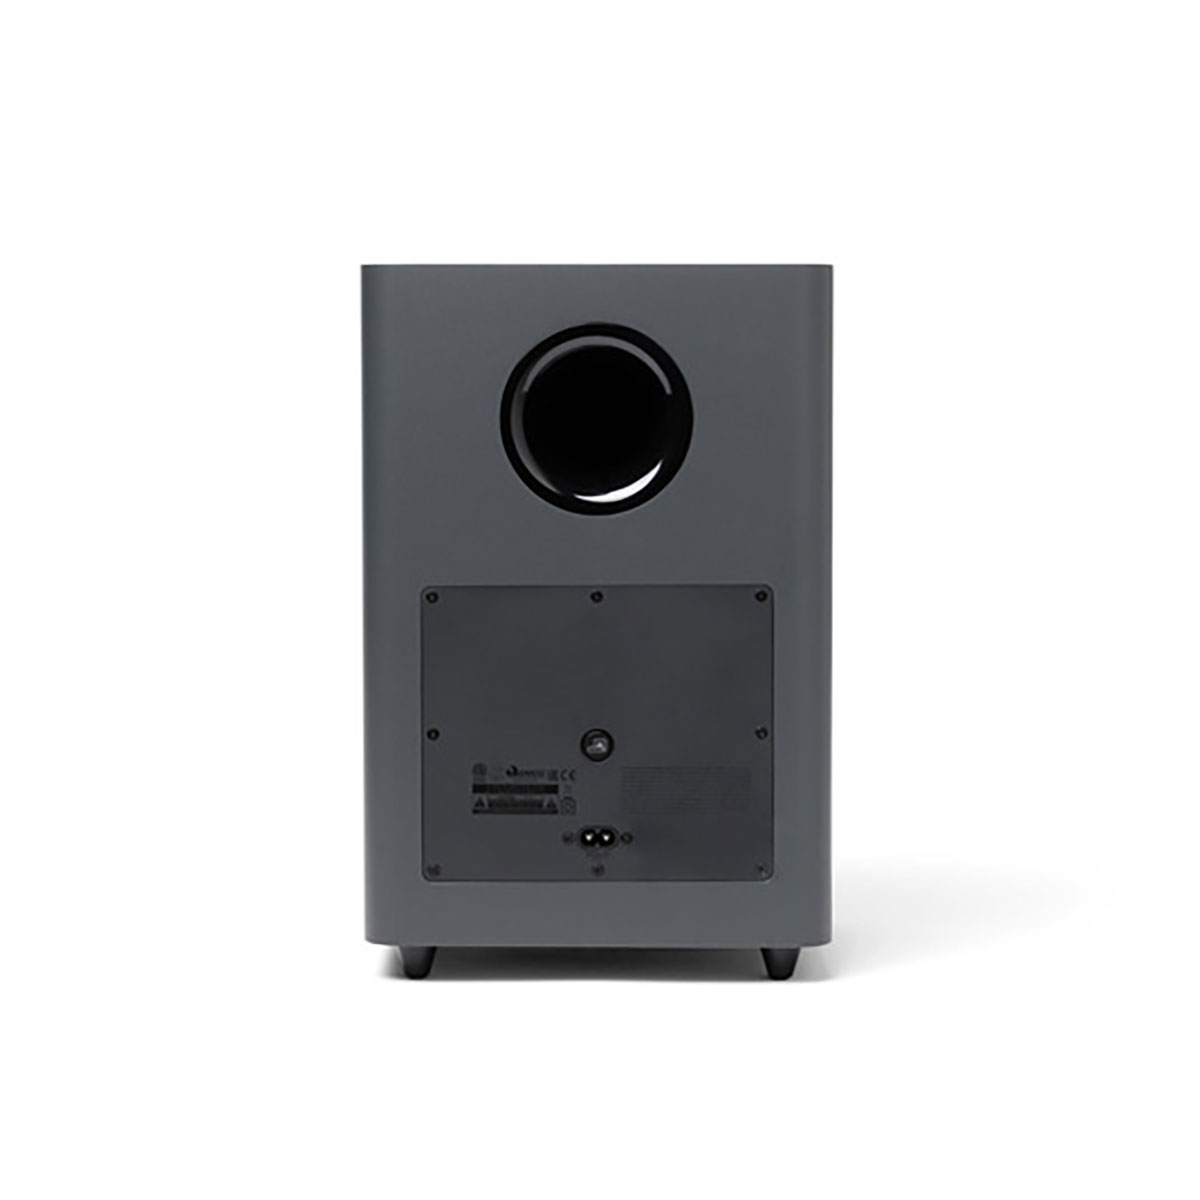 JBL - Subwoofer, wireless with dongle, blk